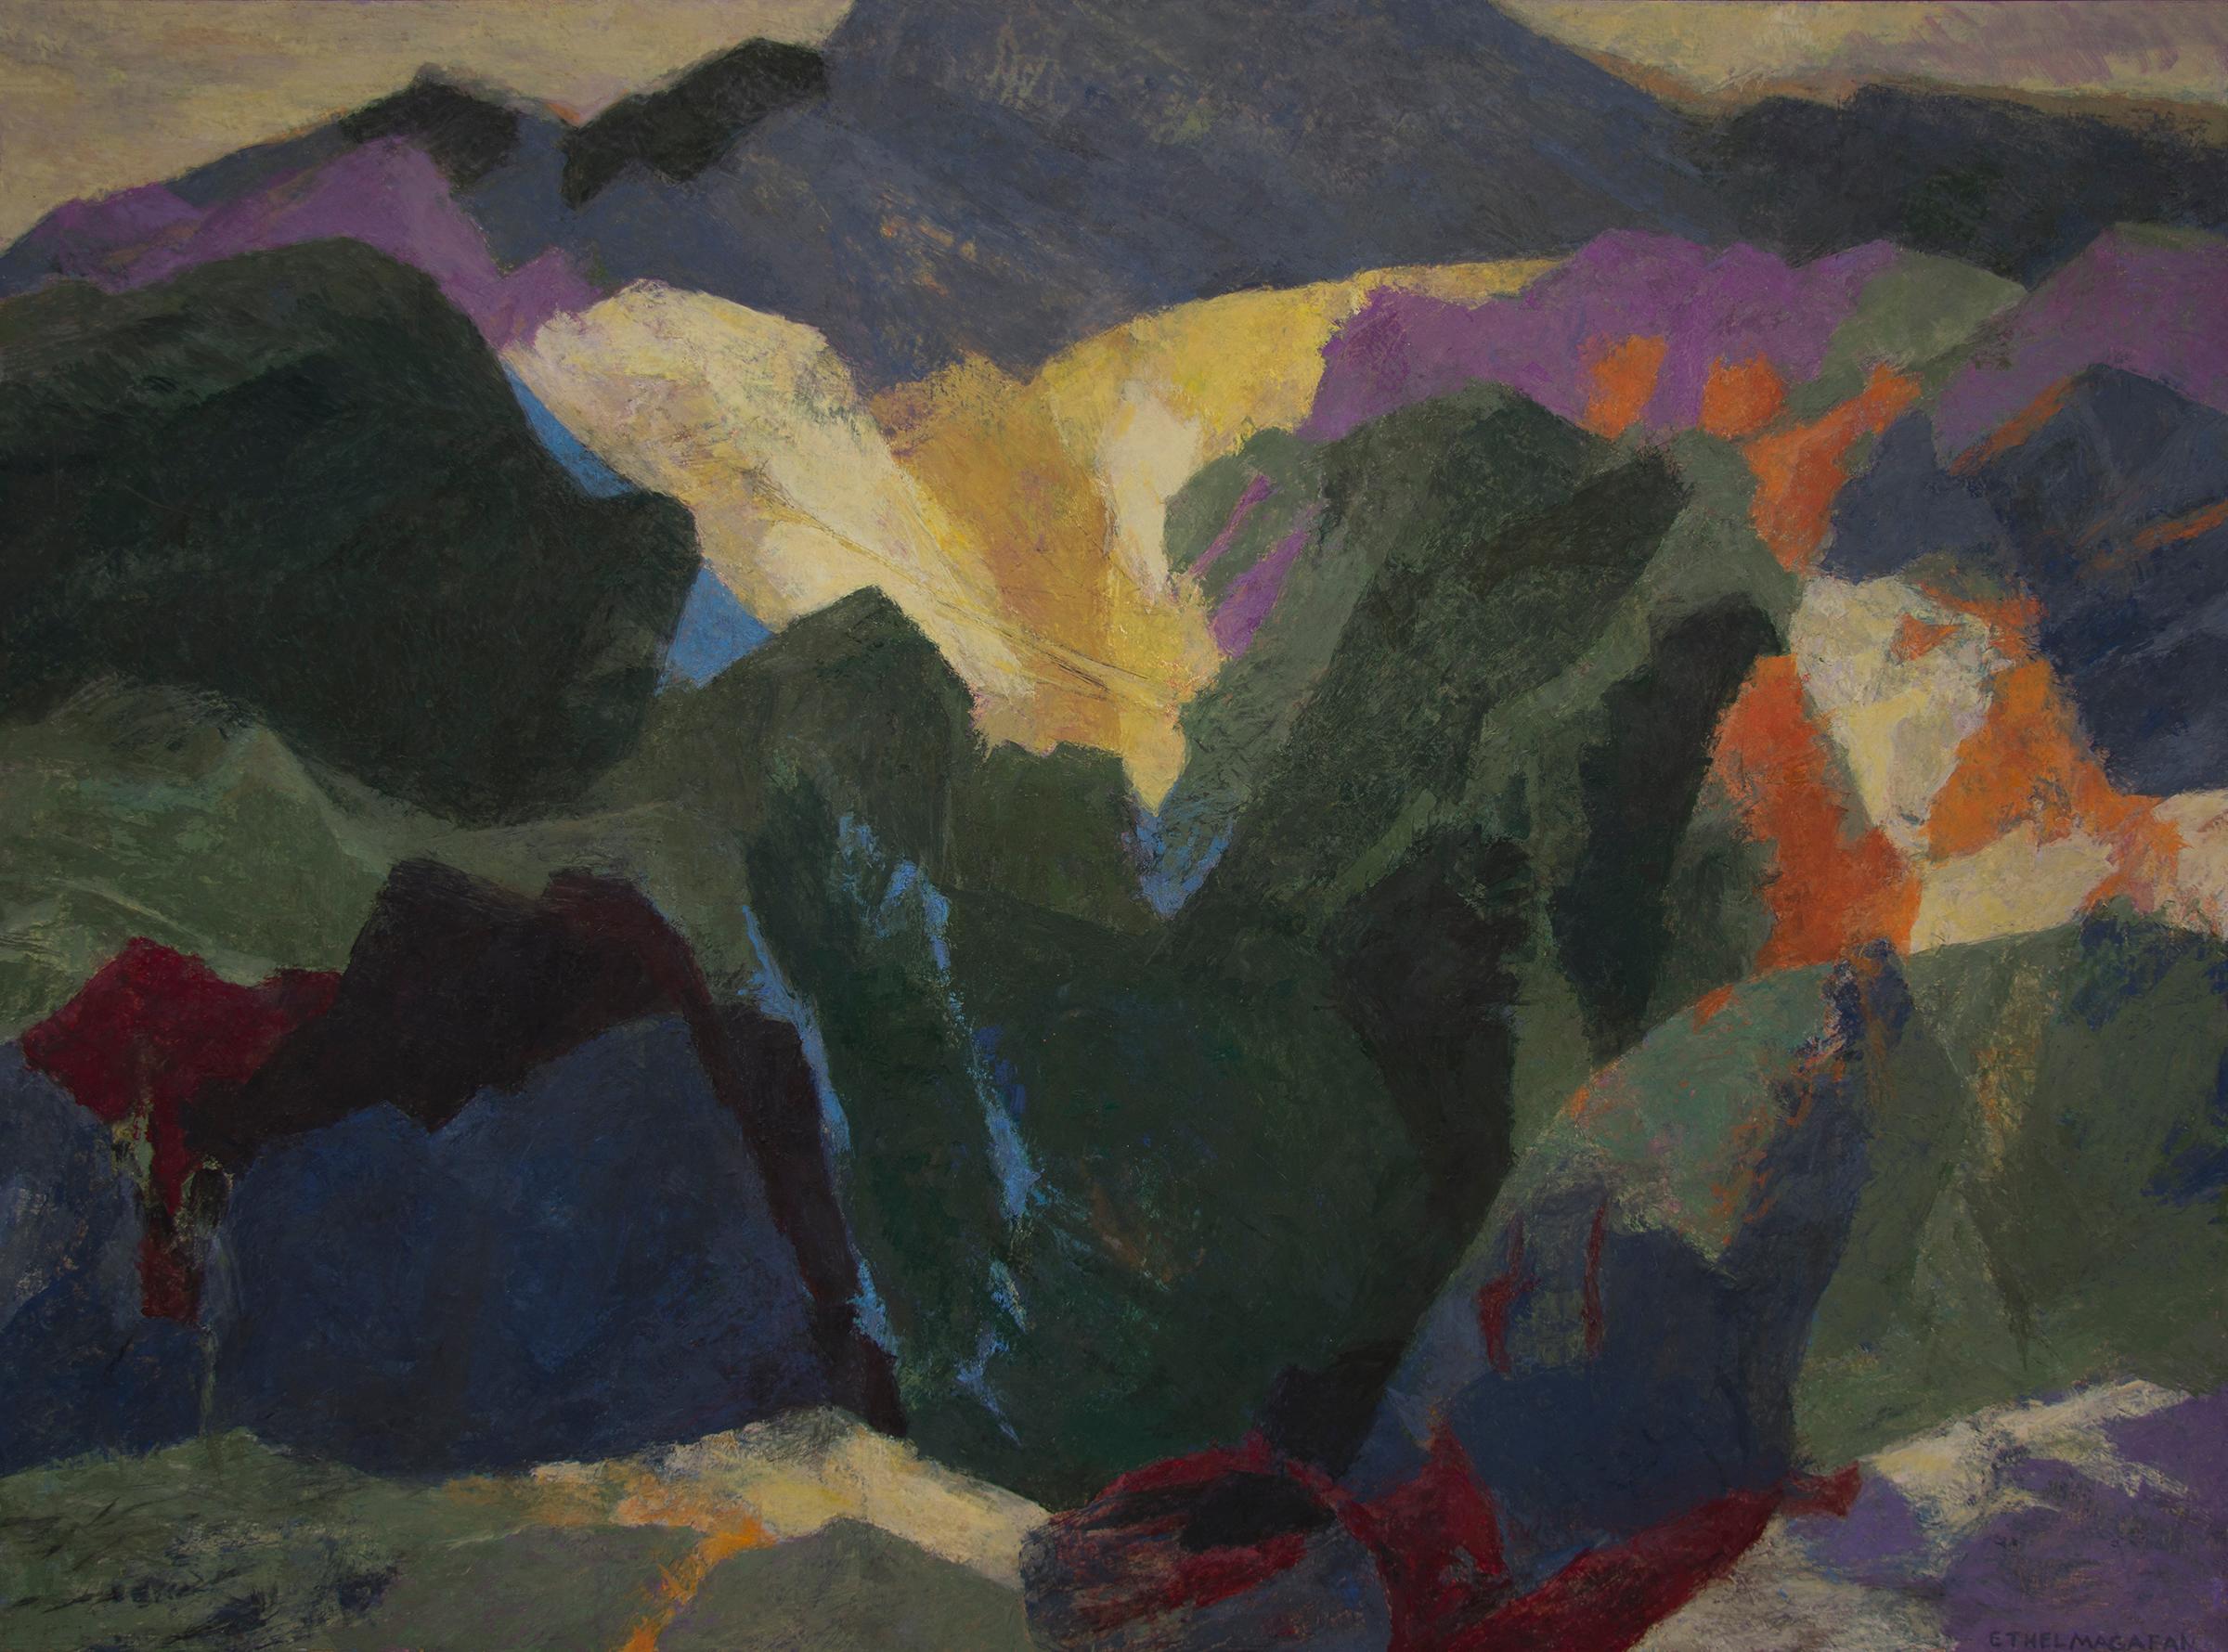 Mt. Sopris (Near Aspen and Carbondale, Colorado) semi-abstract painting - Painting by Ethel Magafan